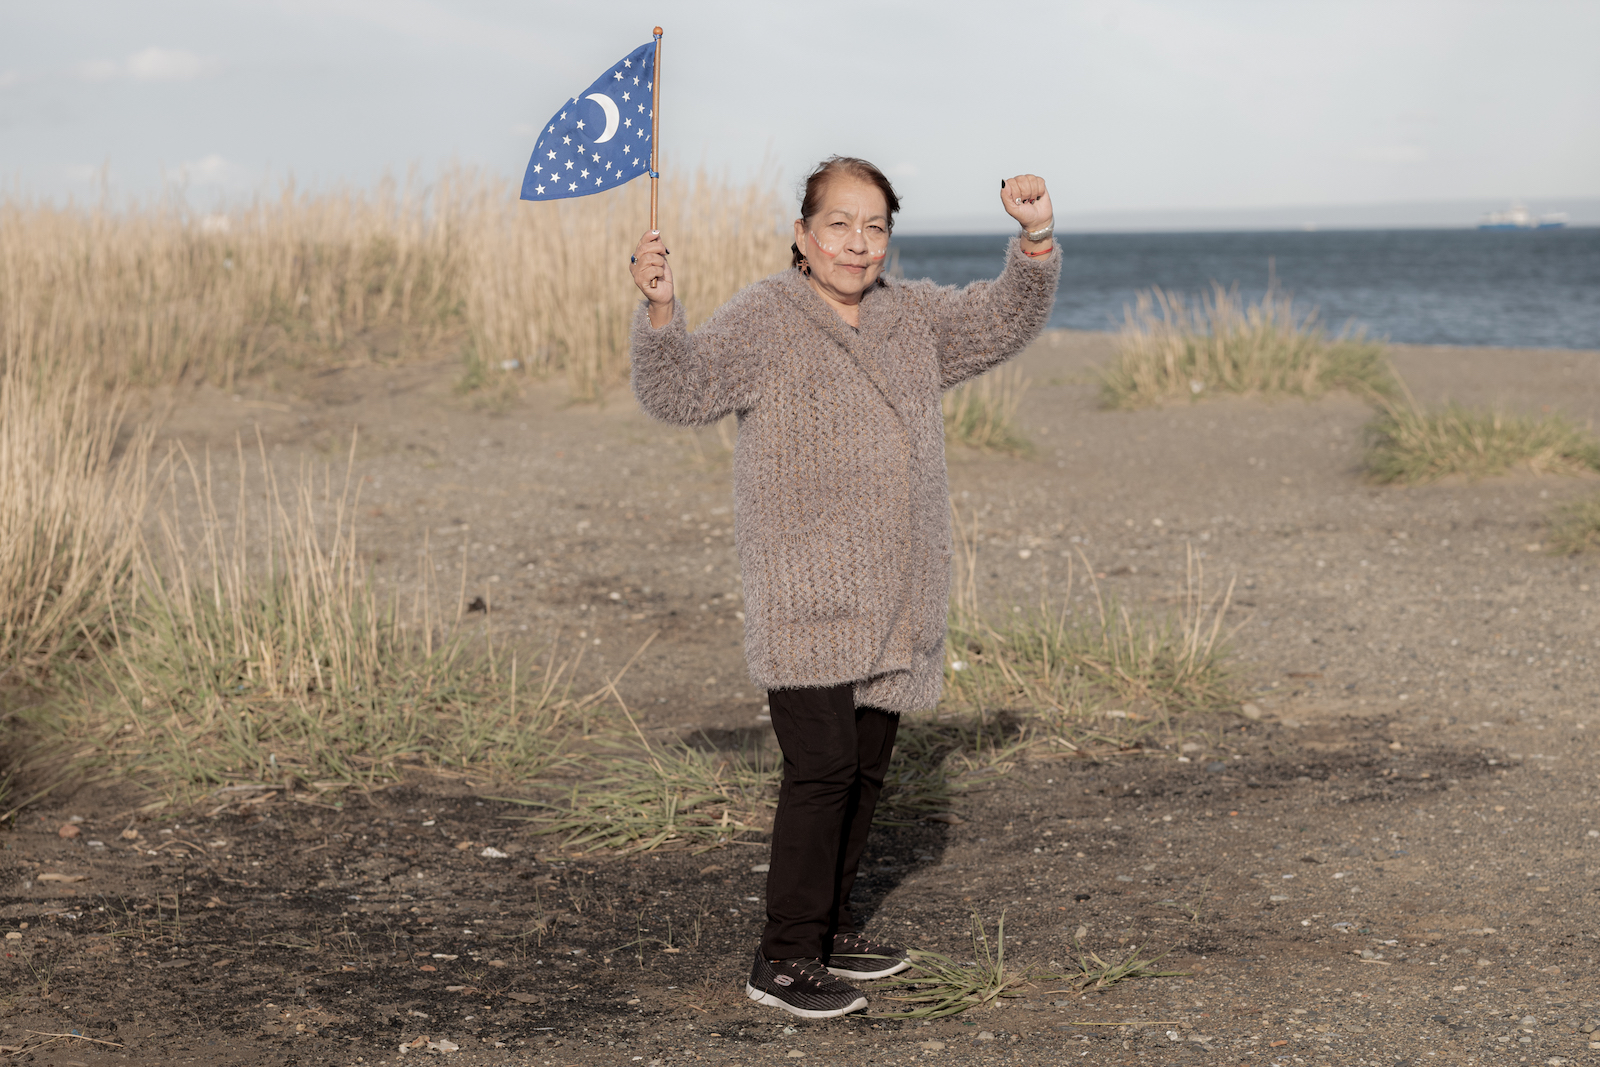 On the banks of the Strait of Magellan, Maria Margarita Vasquez Choque (Pilar) proudly holds the flag that represents the Selk’nam and raises her fist as a sign of struggle and resistance. Punta Arenas, Chile, 2021. Photo: Marcio Pimenta